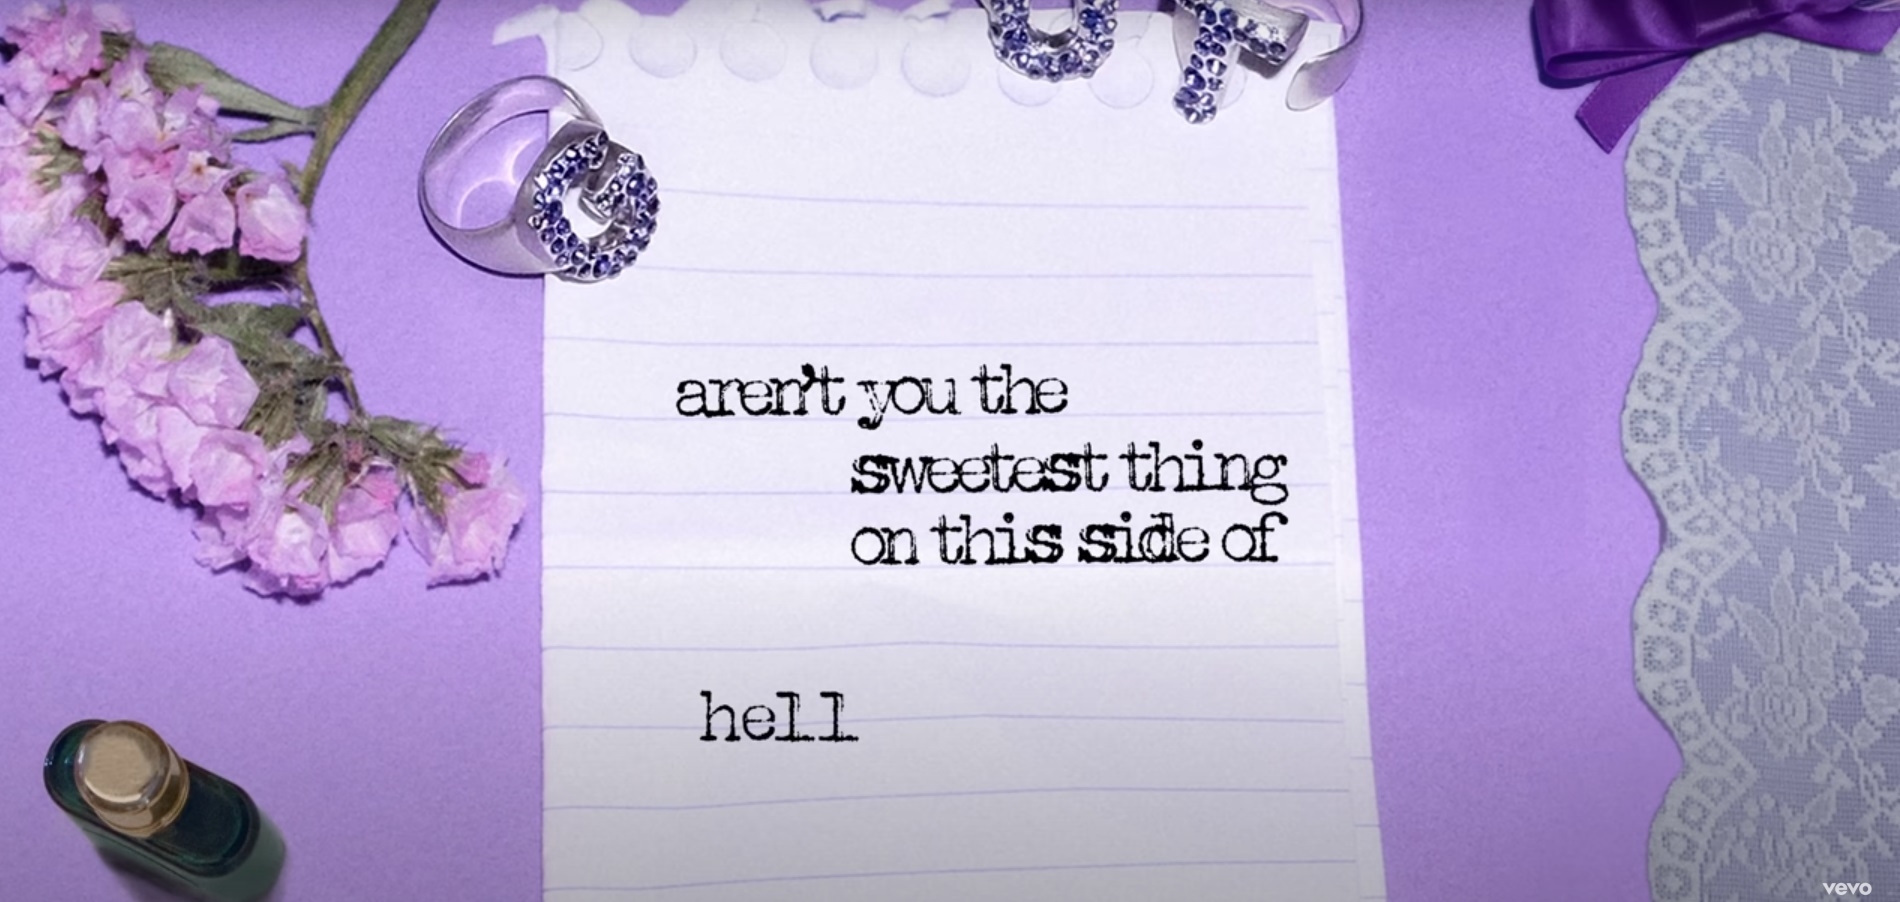 Screenshot of the lyric &quot;aren&#x27;t you the sweetest thing on this side of hell&quot; from the video